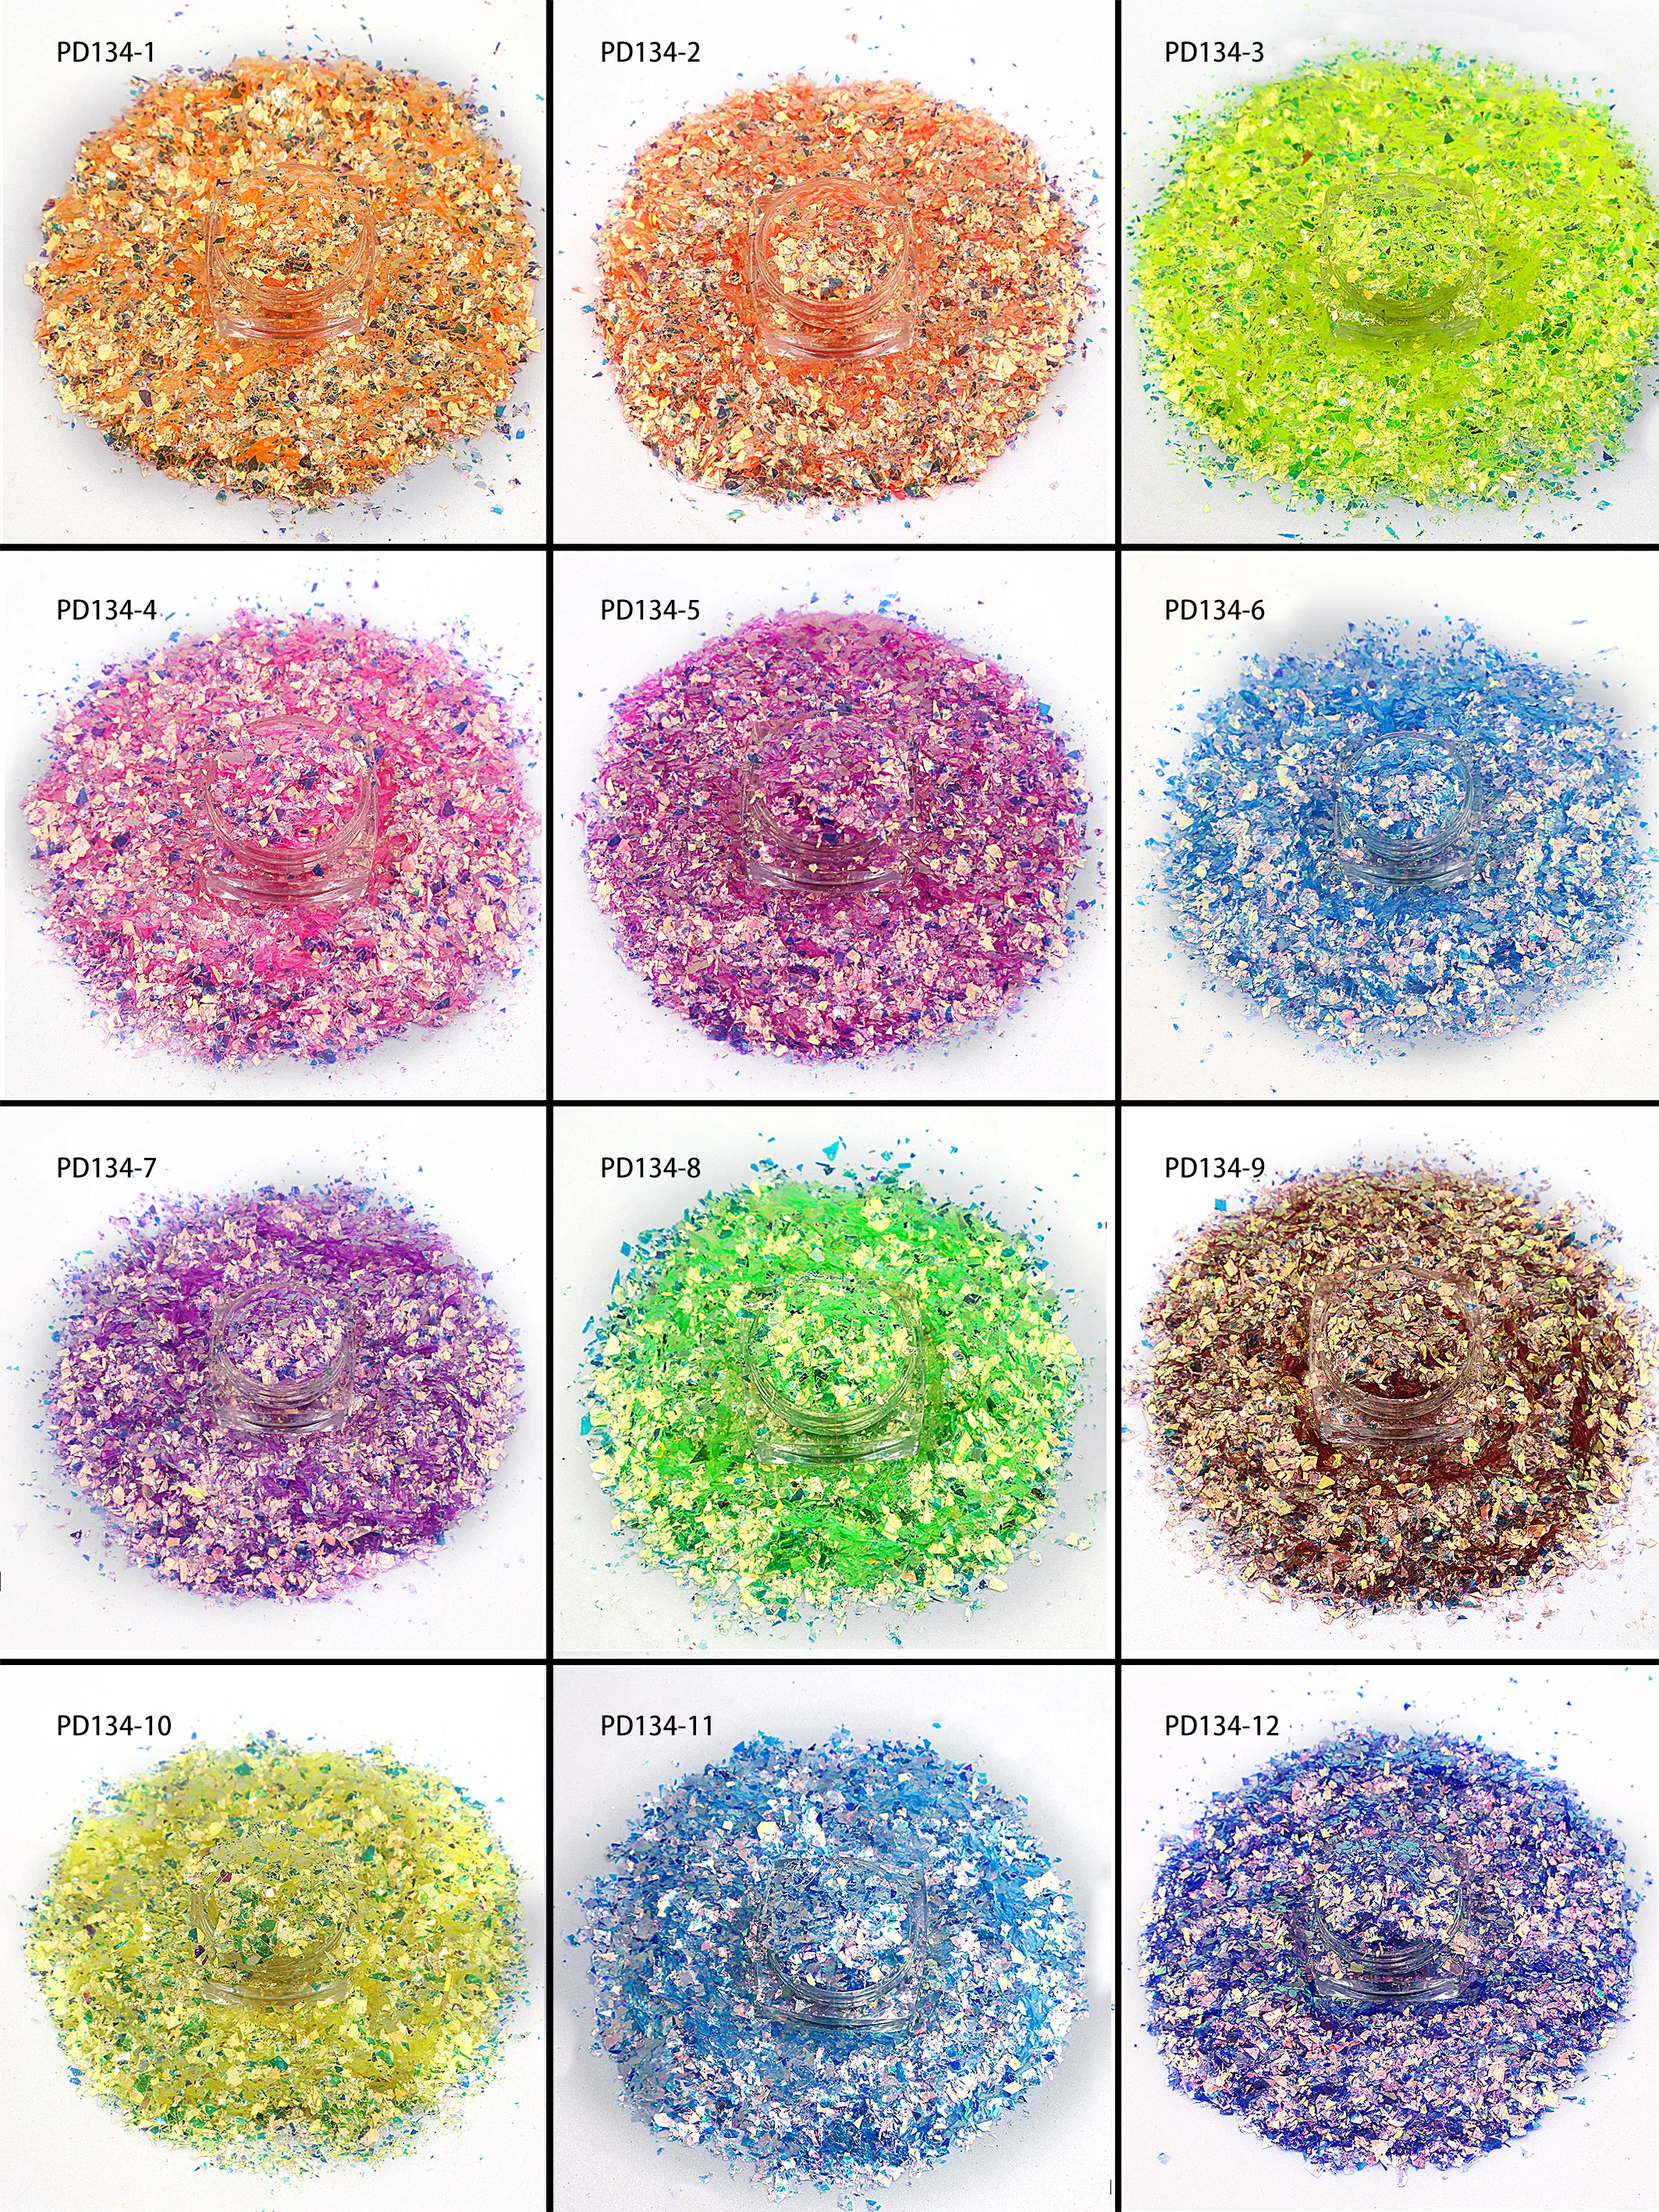 

Sequins Mix For Crafts Playboy Sequins Powder 50g Glitter Mix Flake Bulk Chunky Holo Glitter Nail Art Holographic Glitter Flakes